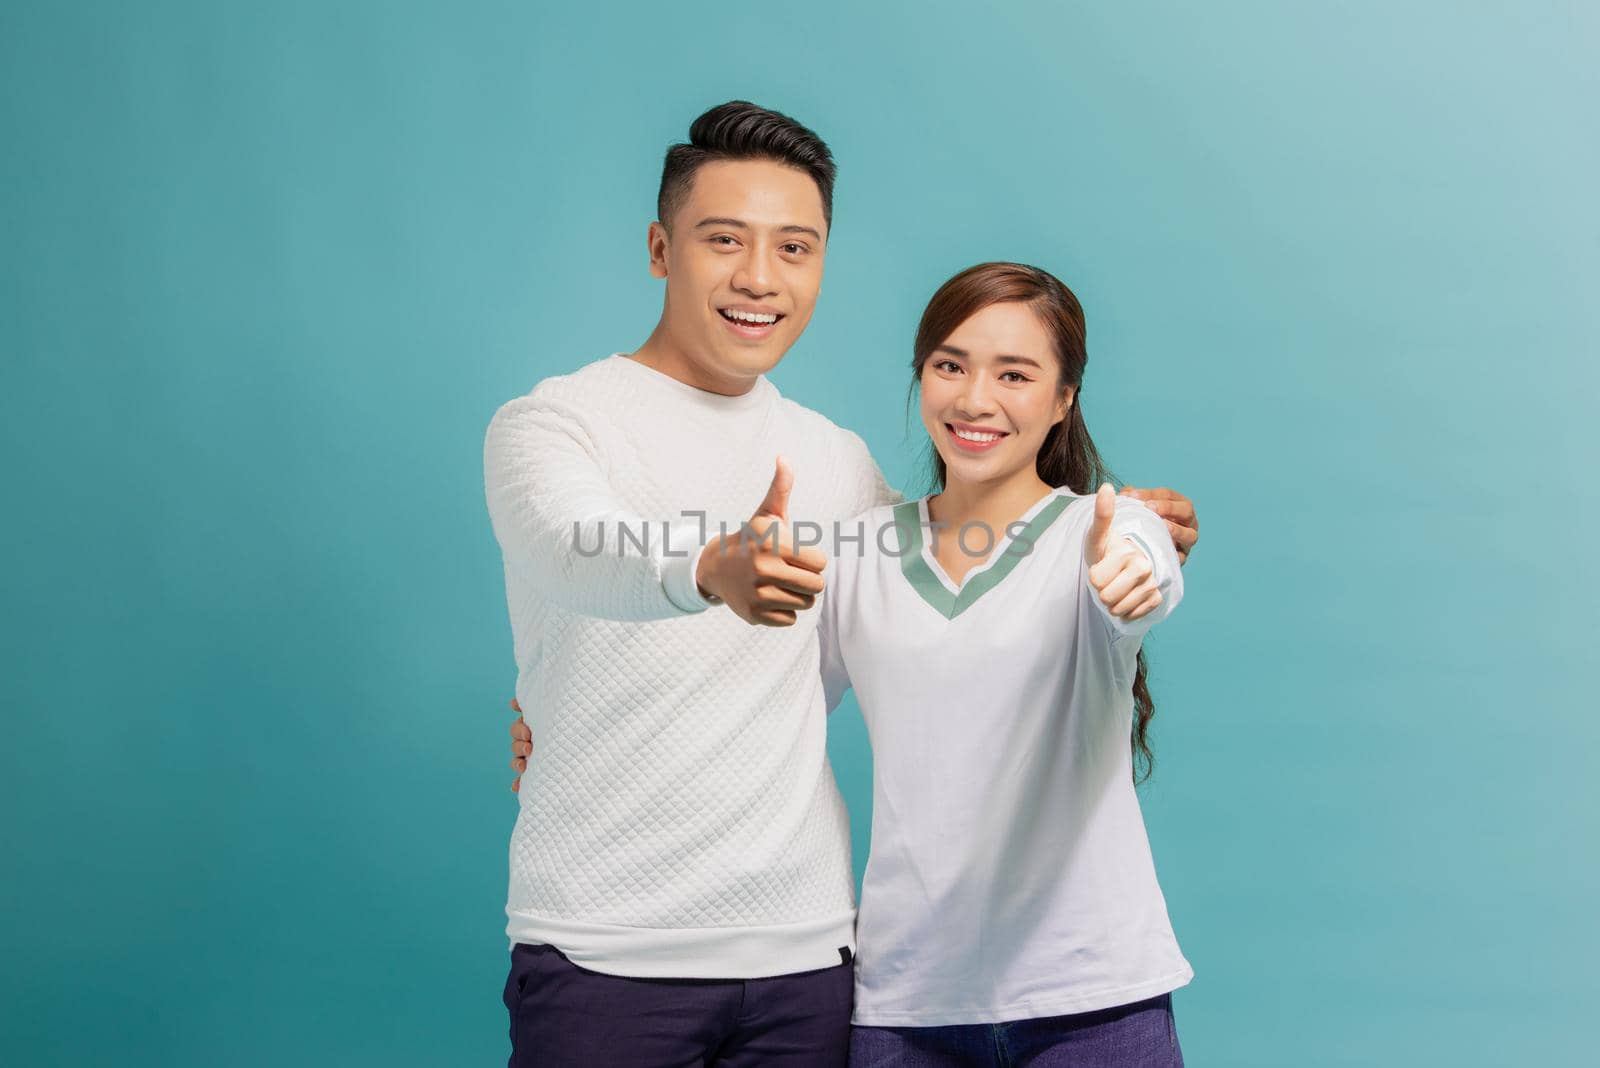 Happy young lovely couple showing thumbs up and looking at the camera over light blue background by makidotvn